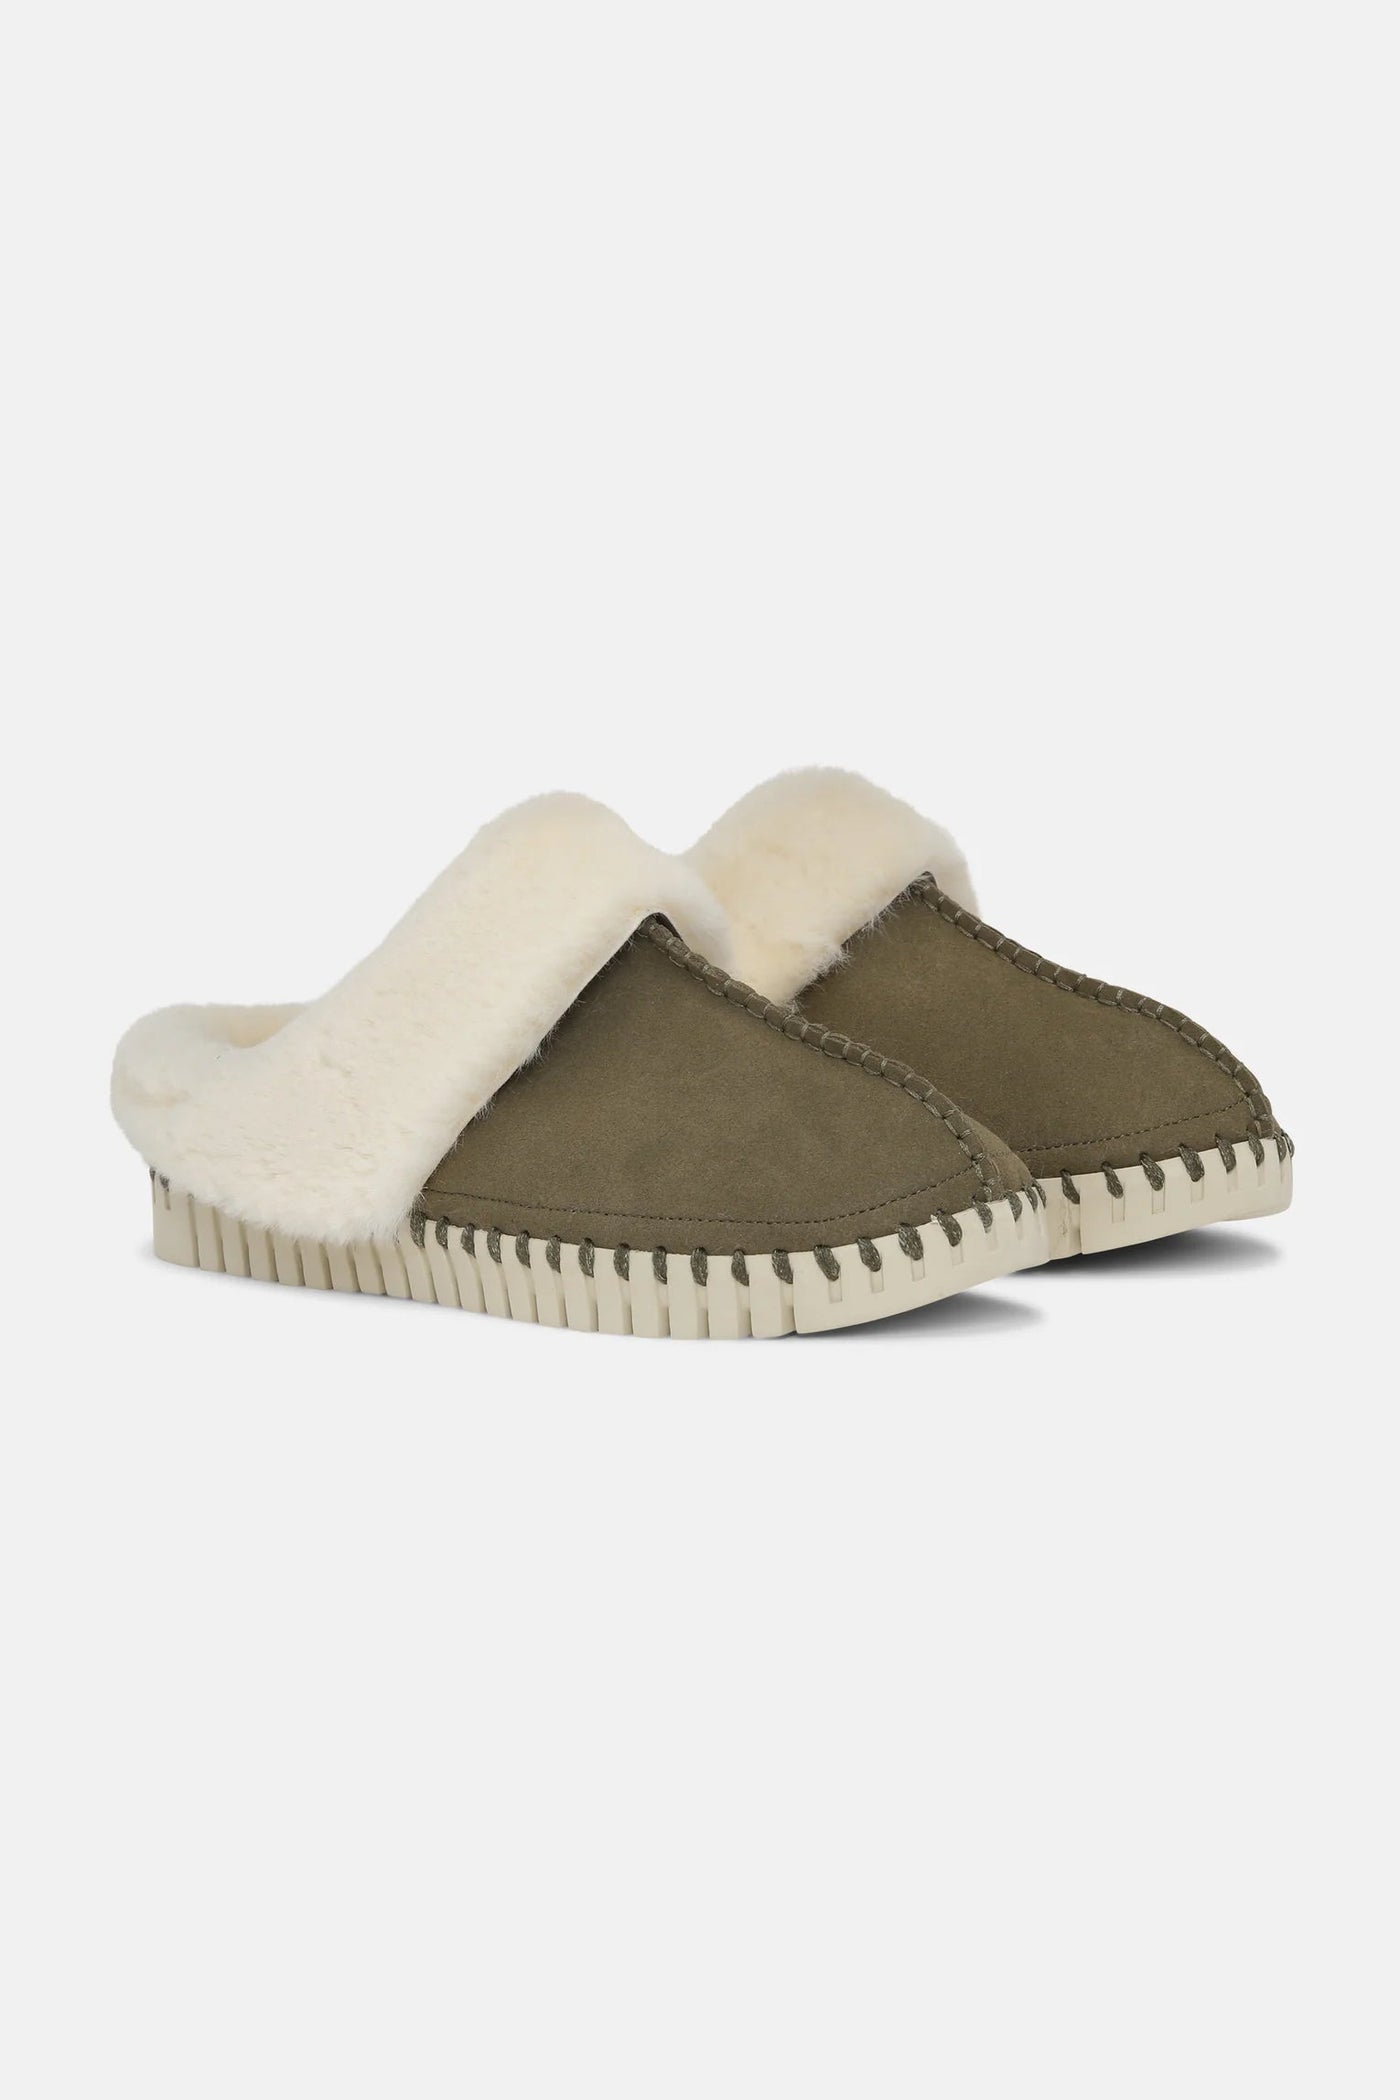 Ilse Jacobsen Tulip Slipper in Deep Olive-Womens-Ohh! By Gum - Shop Sustainable